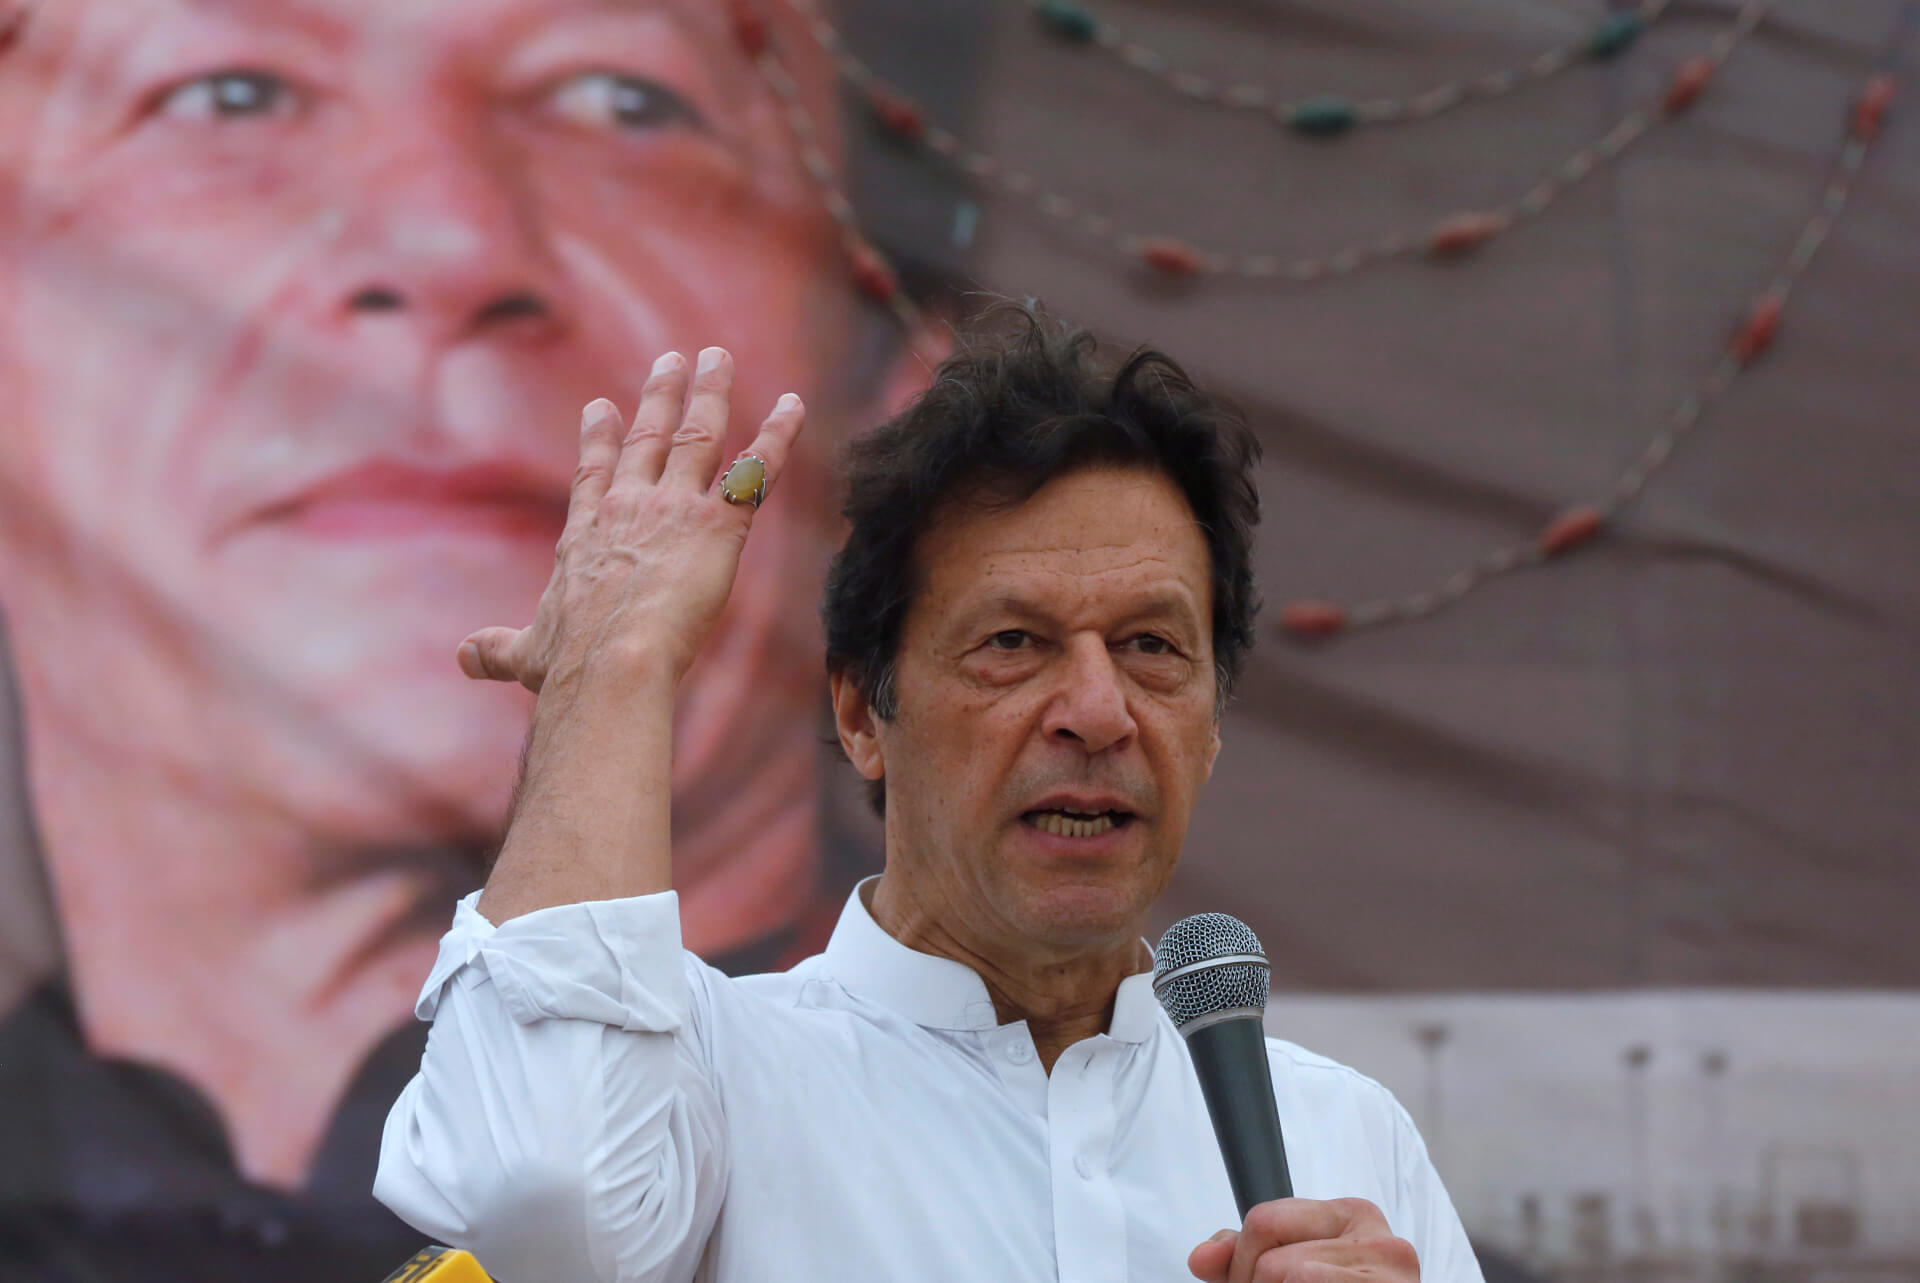 Pakistan: Imran Khan Indicted by Special Court for Leaking Secret Diplomatic Documents